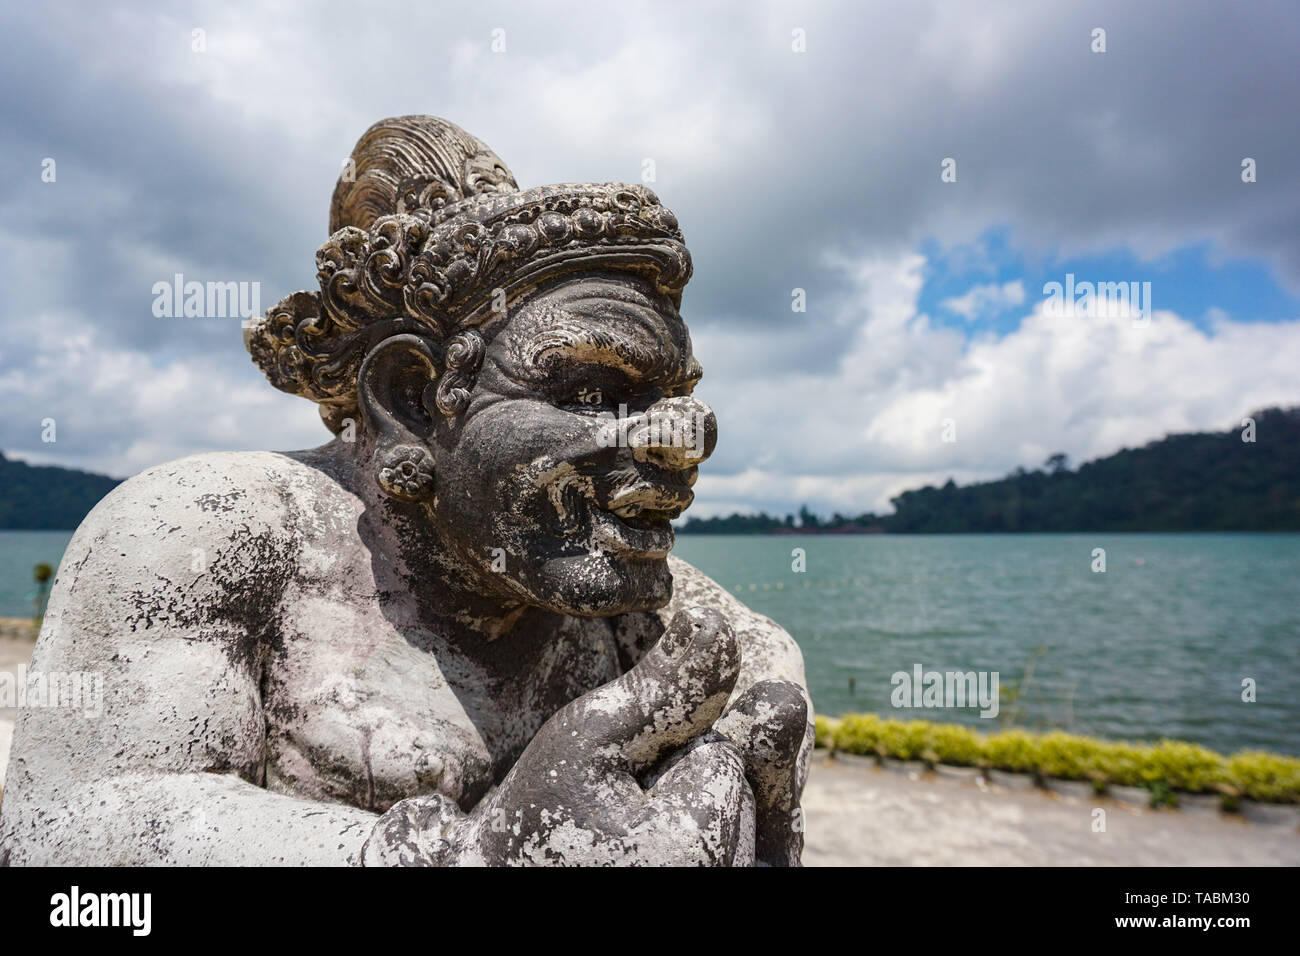 Closeup of a half size stone carved statue depicting a warrior god in Balinese Hindu spiritual temple, Bali, Indonesia Stock Photo